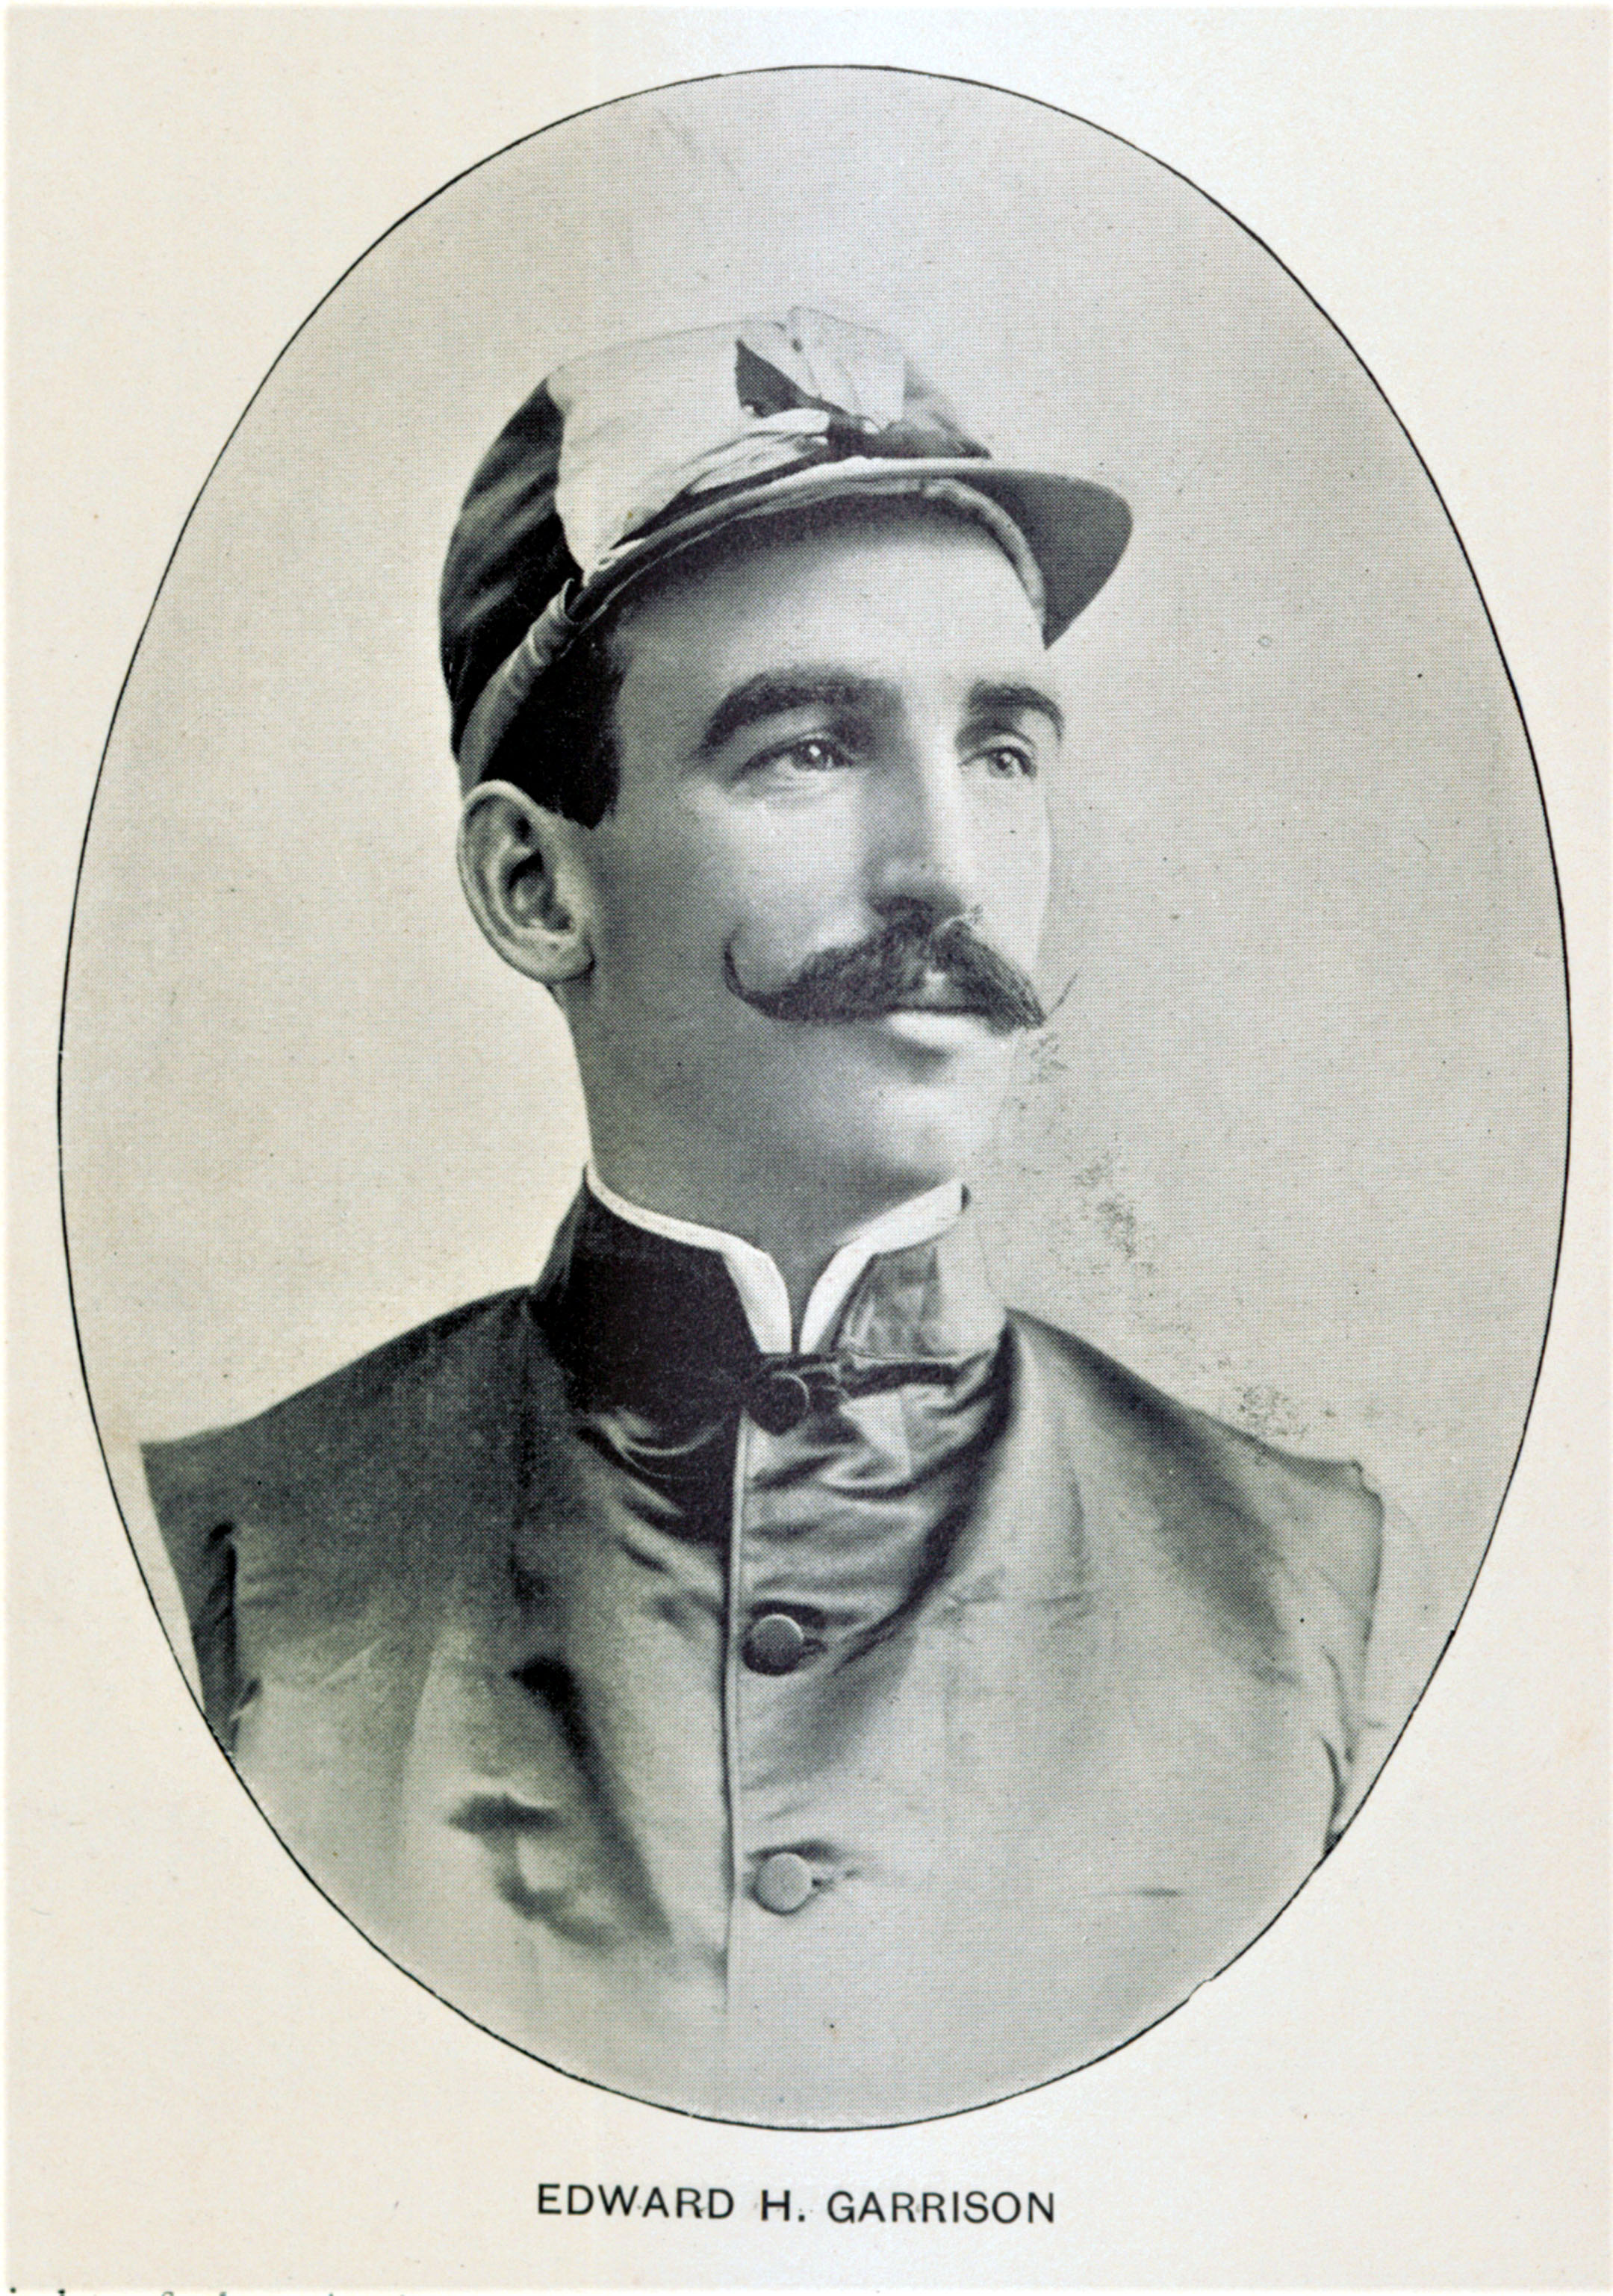 Photograph of jockey Edward H. Garrison from The American Turf (Keeneland Library Collection)